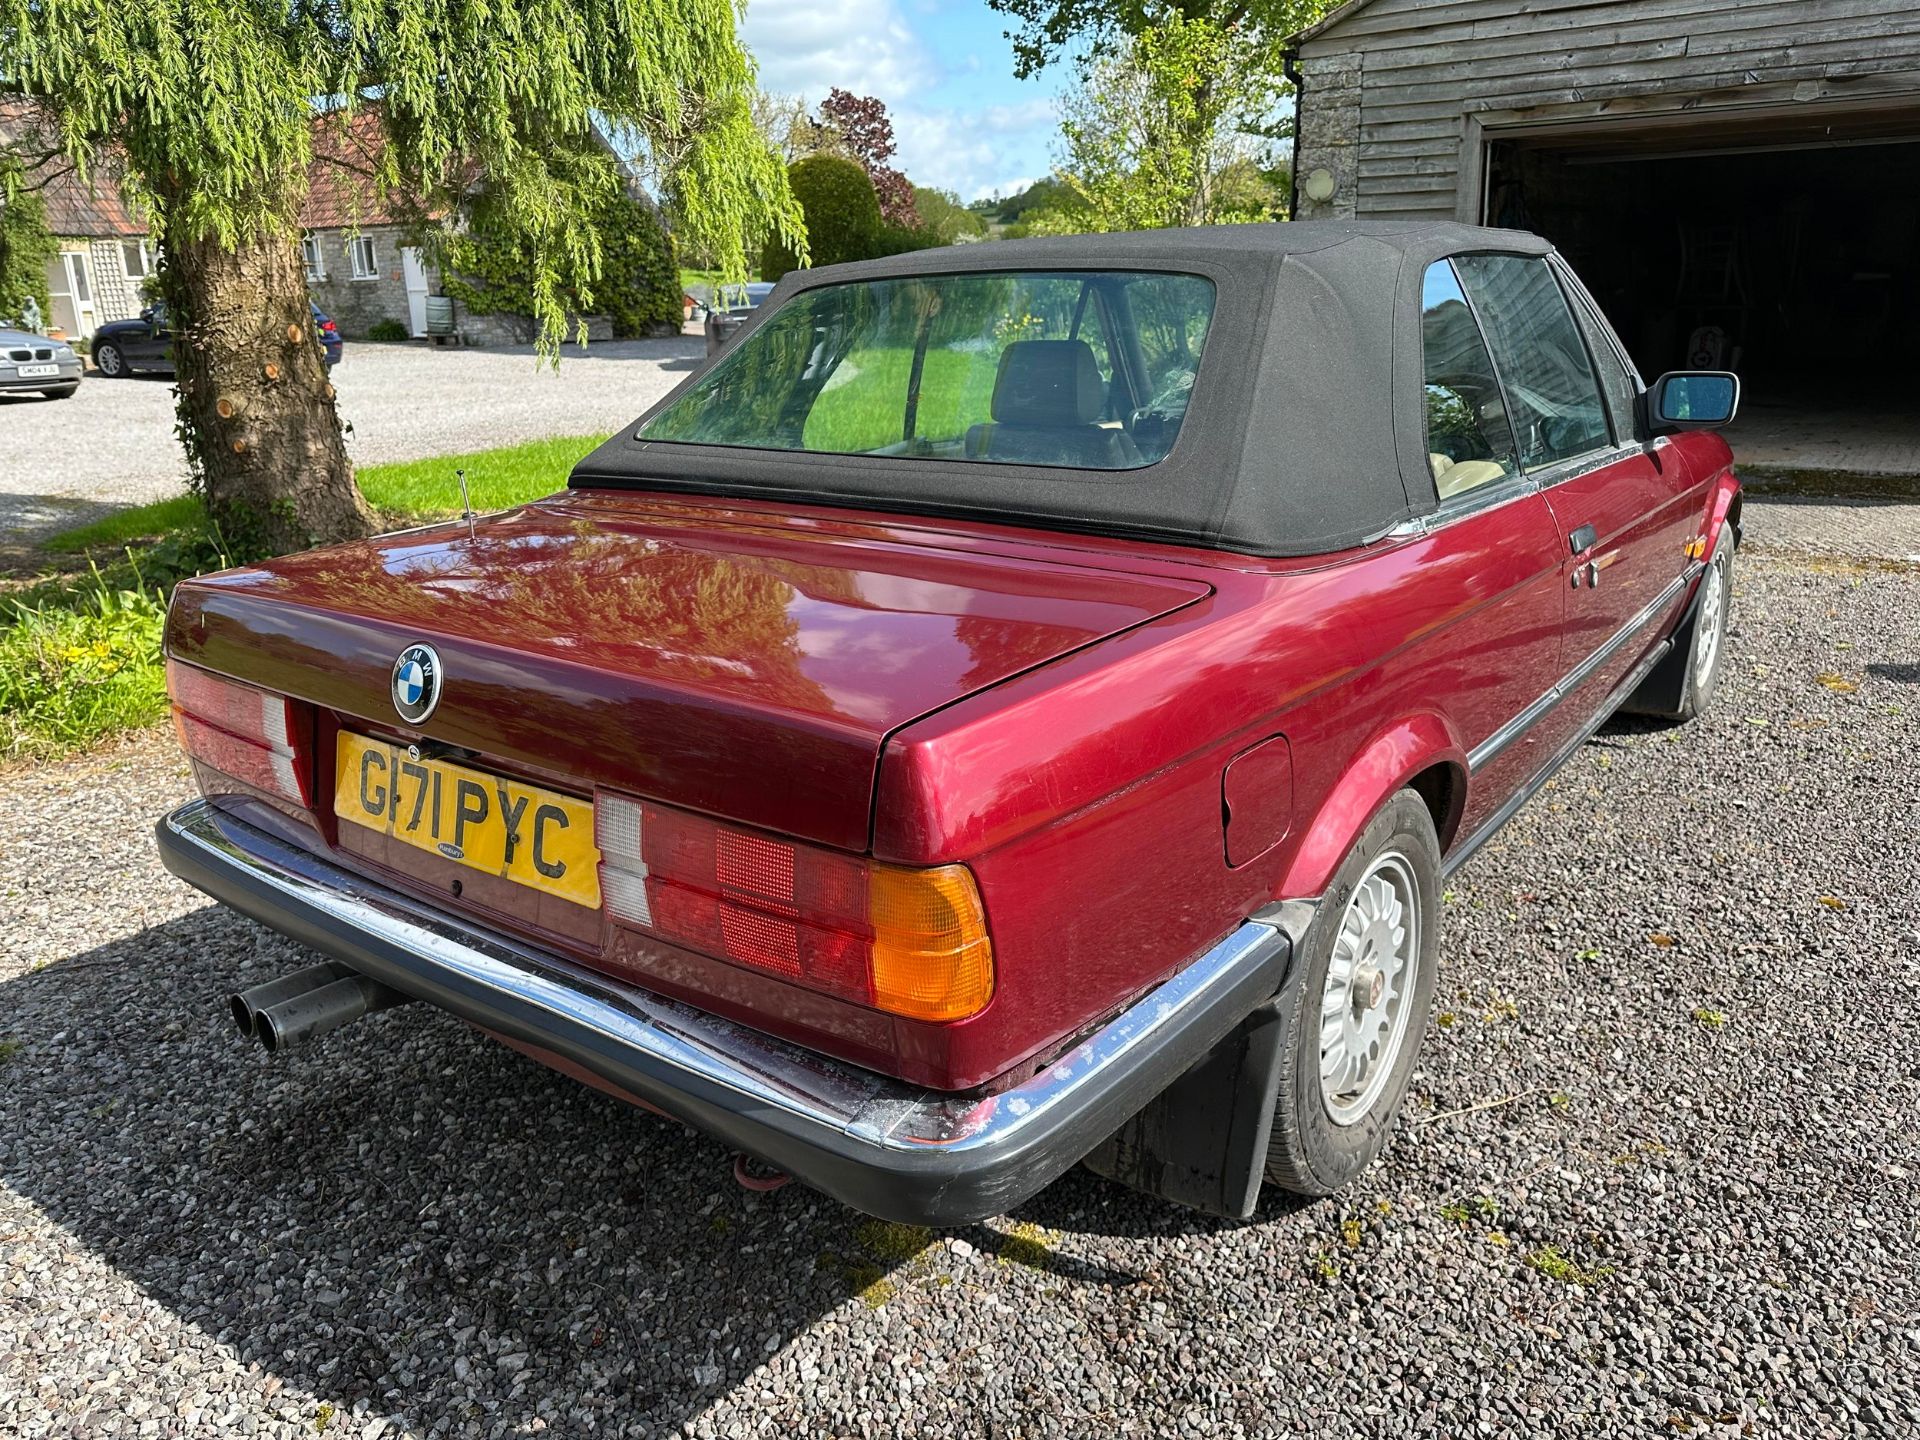 1990 BMW 325i Convertible Registration number G171 PYC Chassis number WBABB12070LB95832 Engine - Image 10 of 67